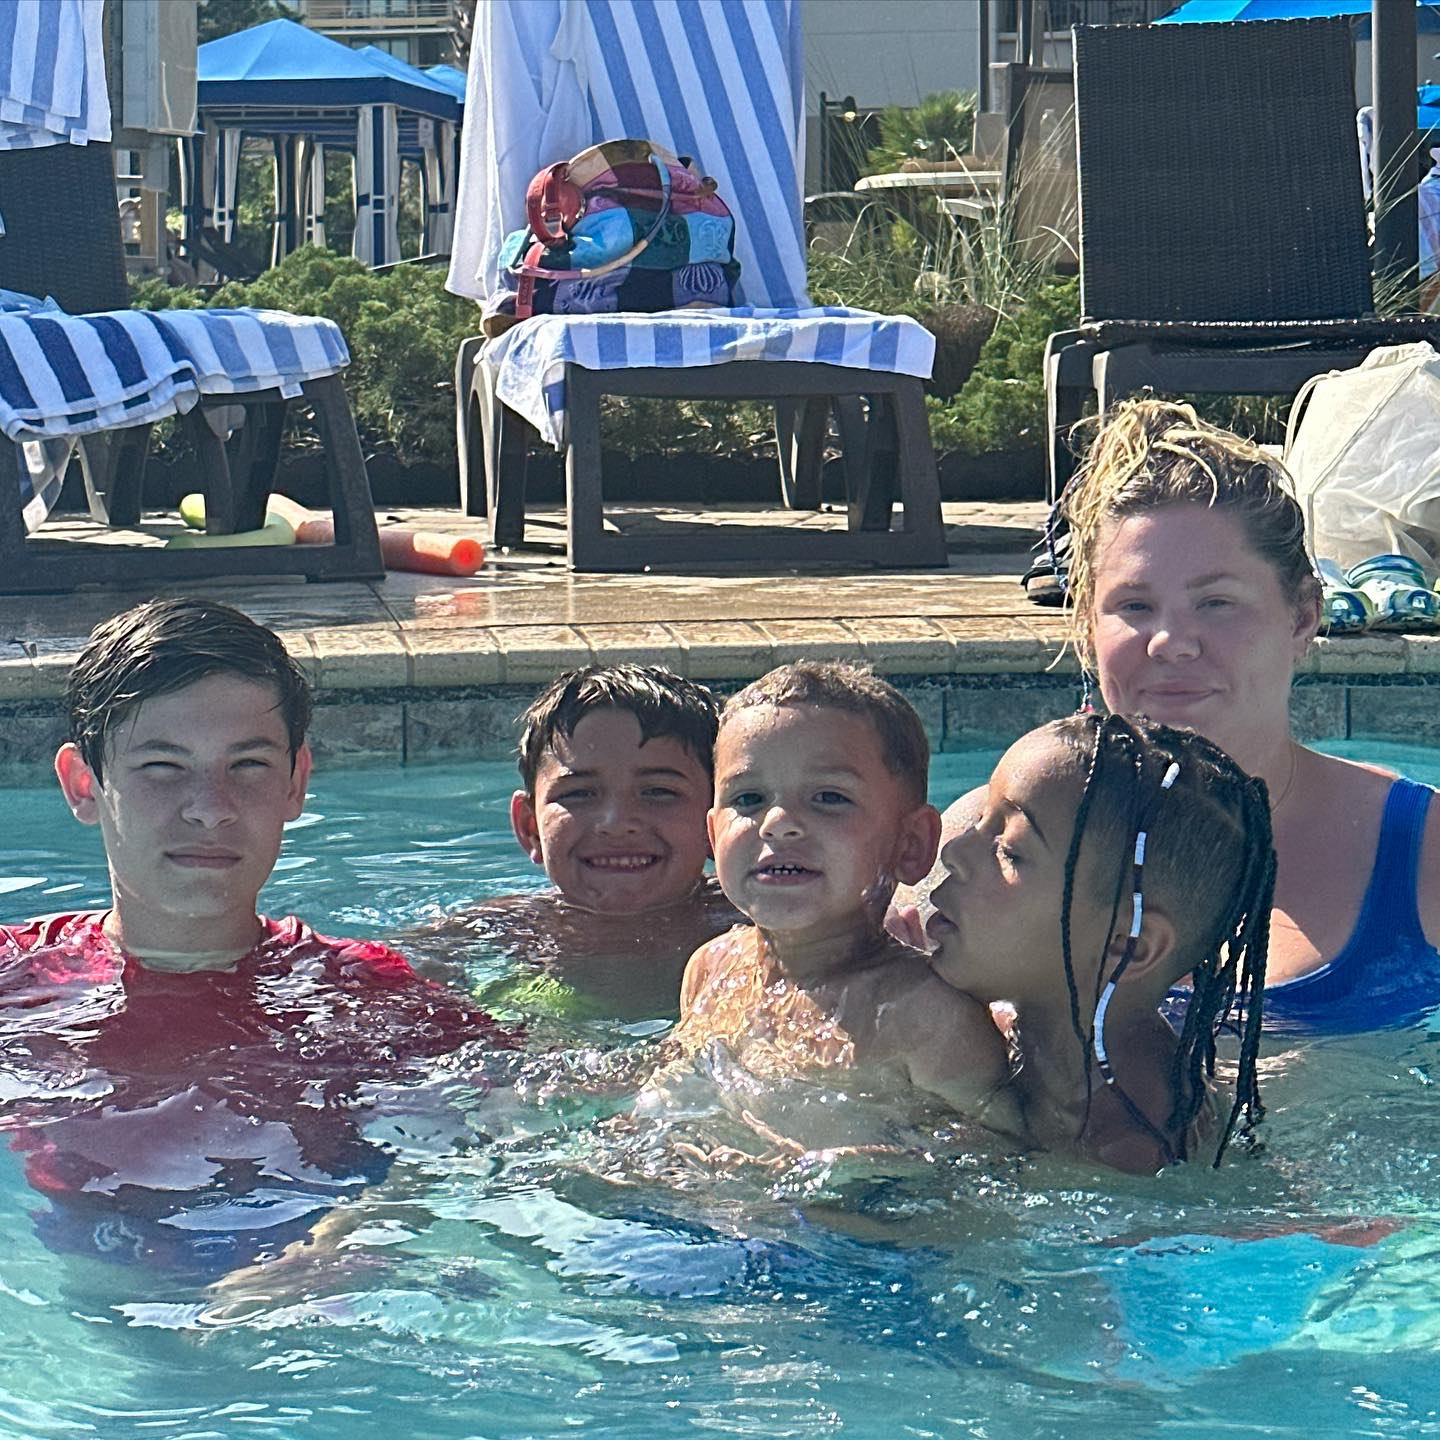 Kailyn is also a mom to sons: Isaac, Lincoln, Lux, and Creed, with her respective exes